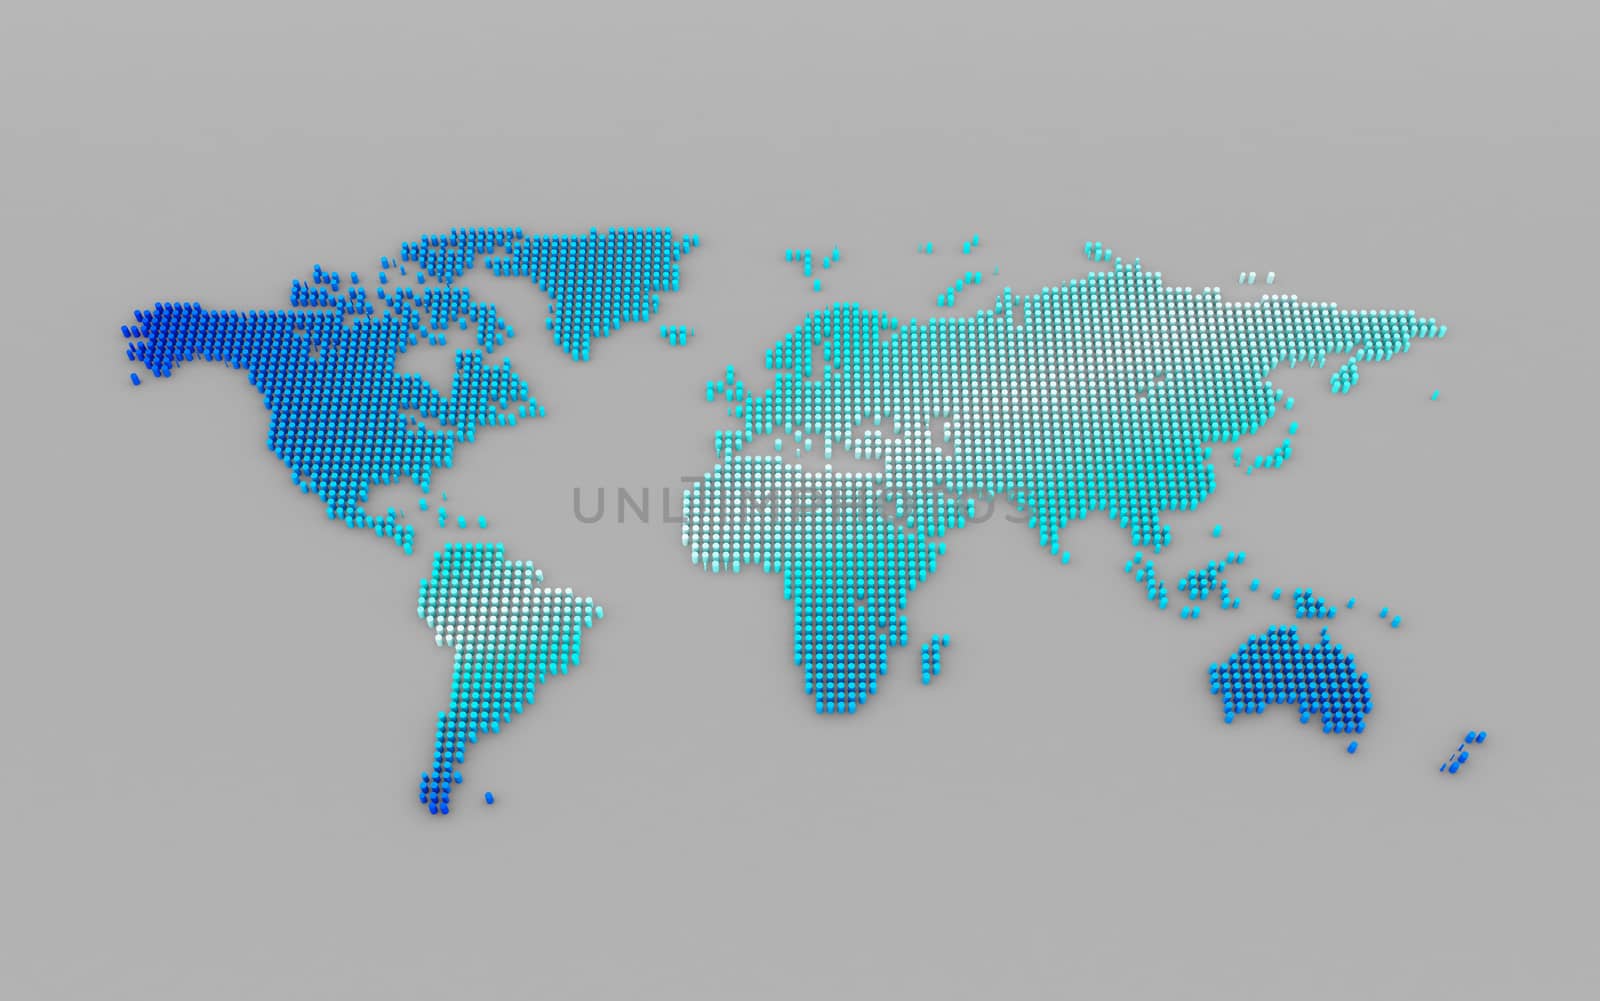 Abstract computer graphic World map of blue round dots by teerawit